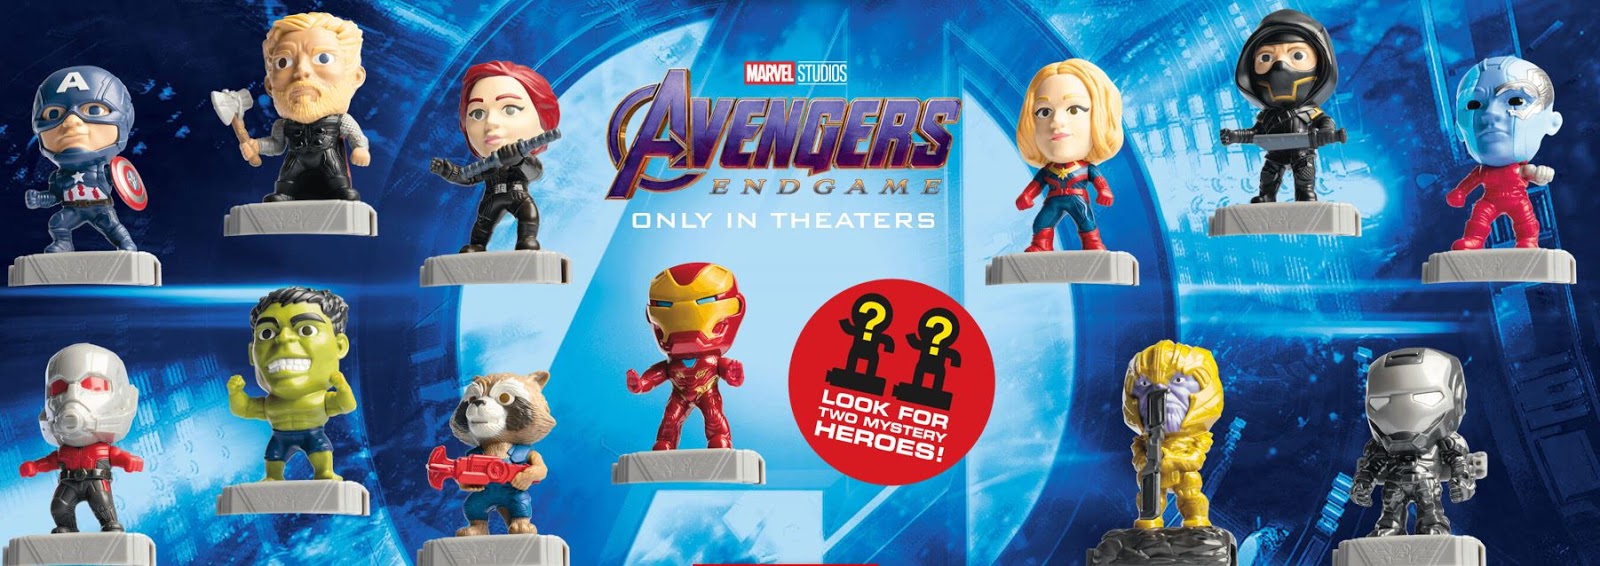 A GEEK DADDY AVENGERS ENDGAME HAPPY MEAL TOYS